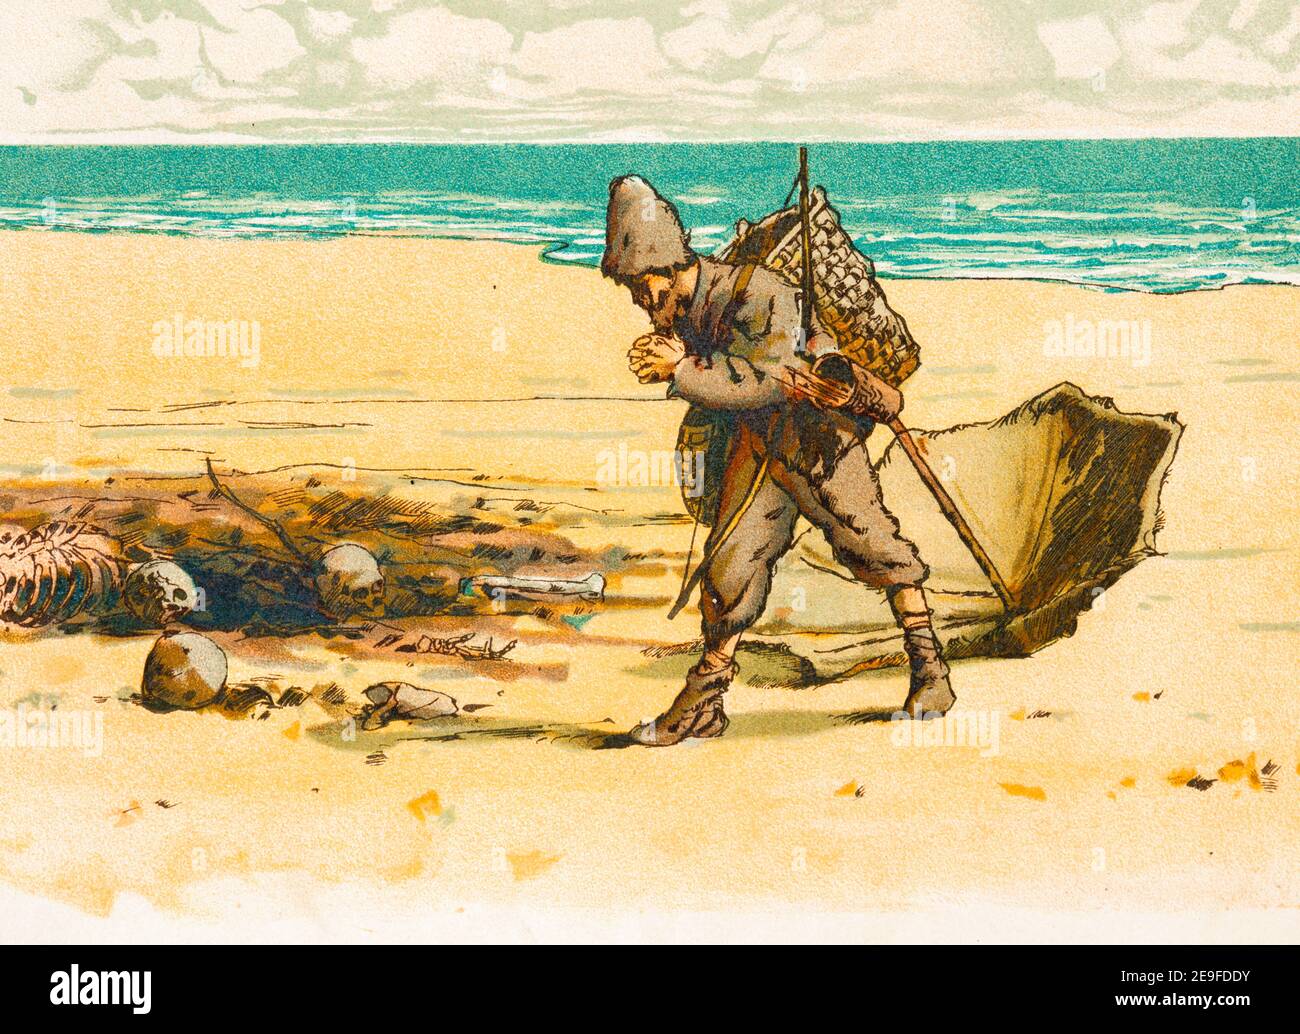 In horror Robinson discovers a human skeleton on the beach, Robinson Crusoe, adopted by J. Lohmeyer, watercolors by Carl Marr, Leipzig about 1890 Stock Photo